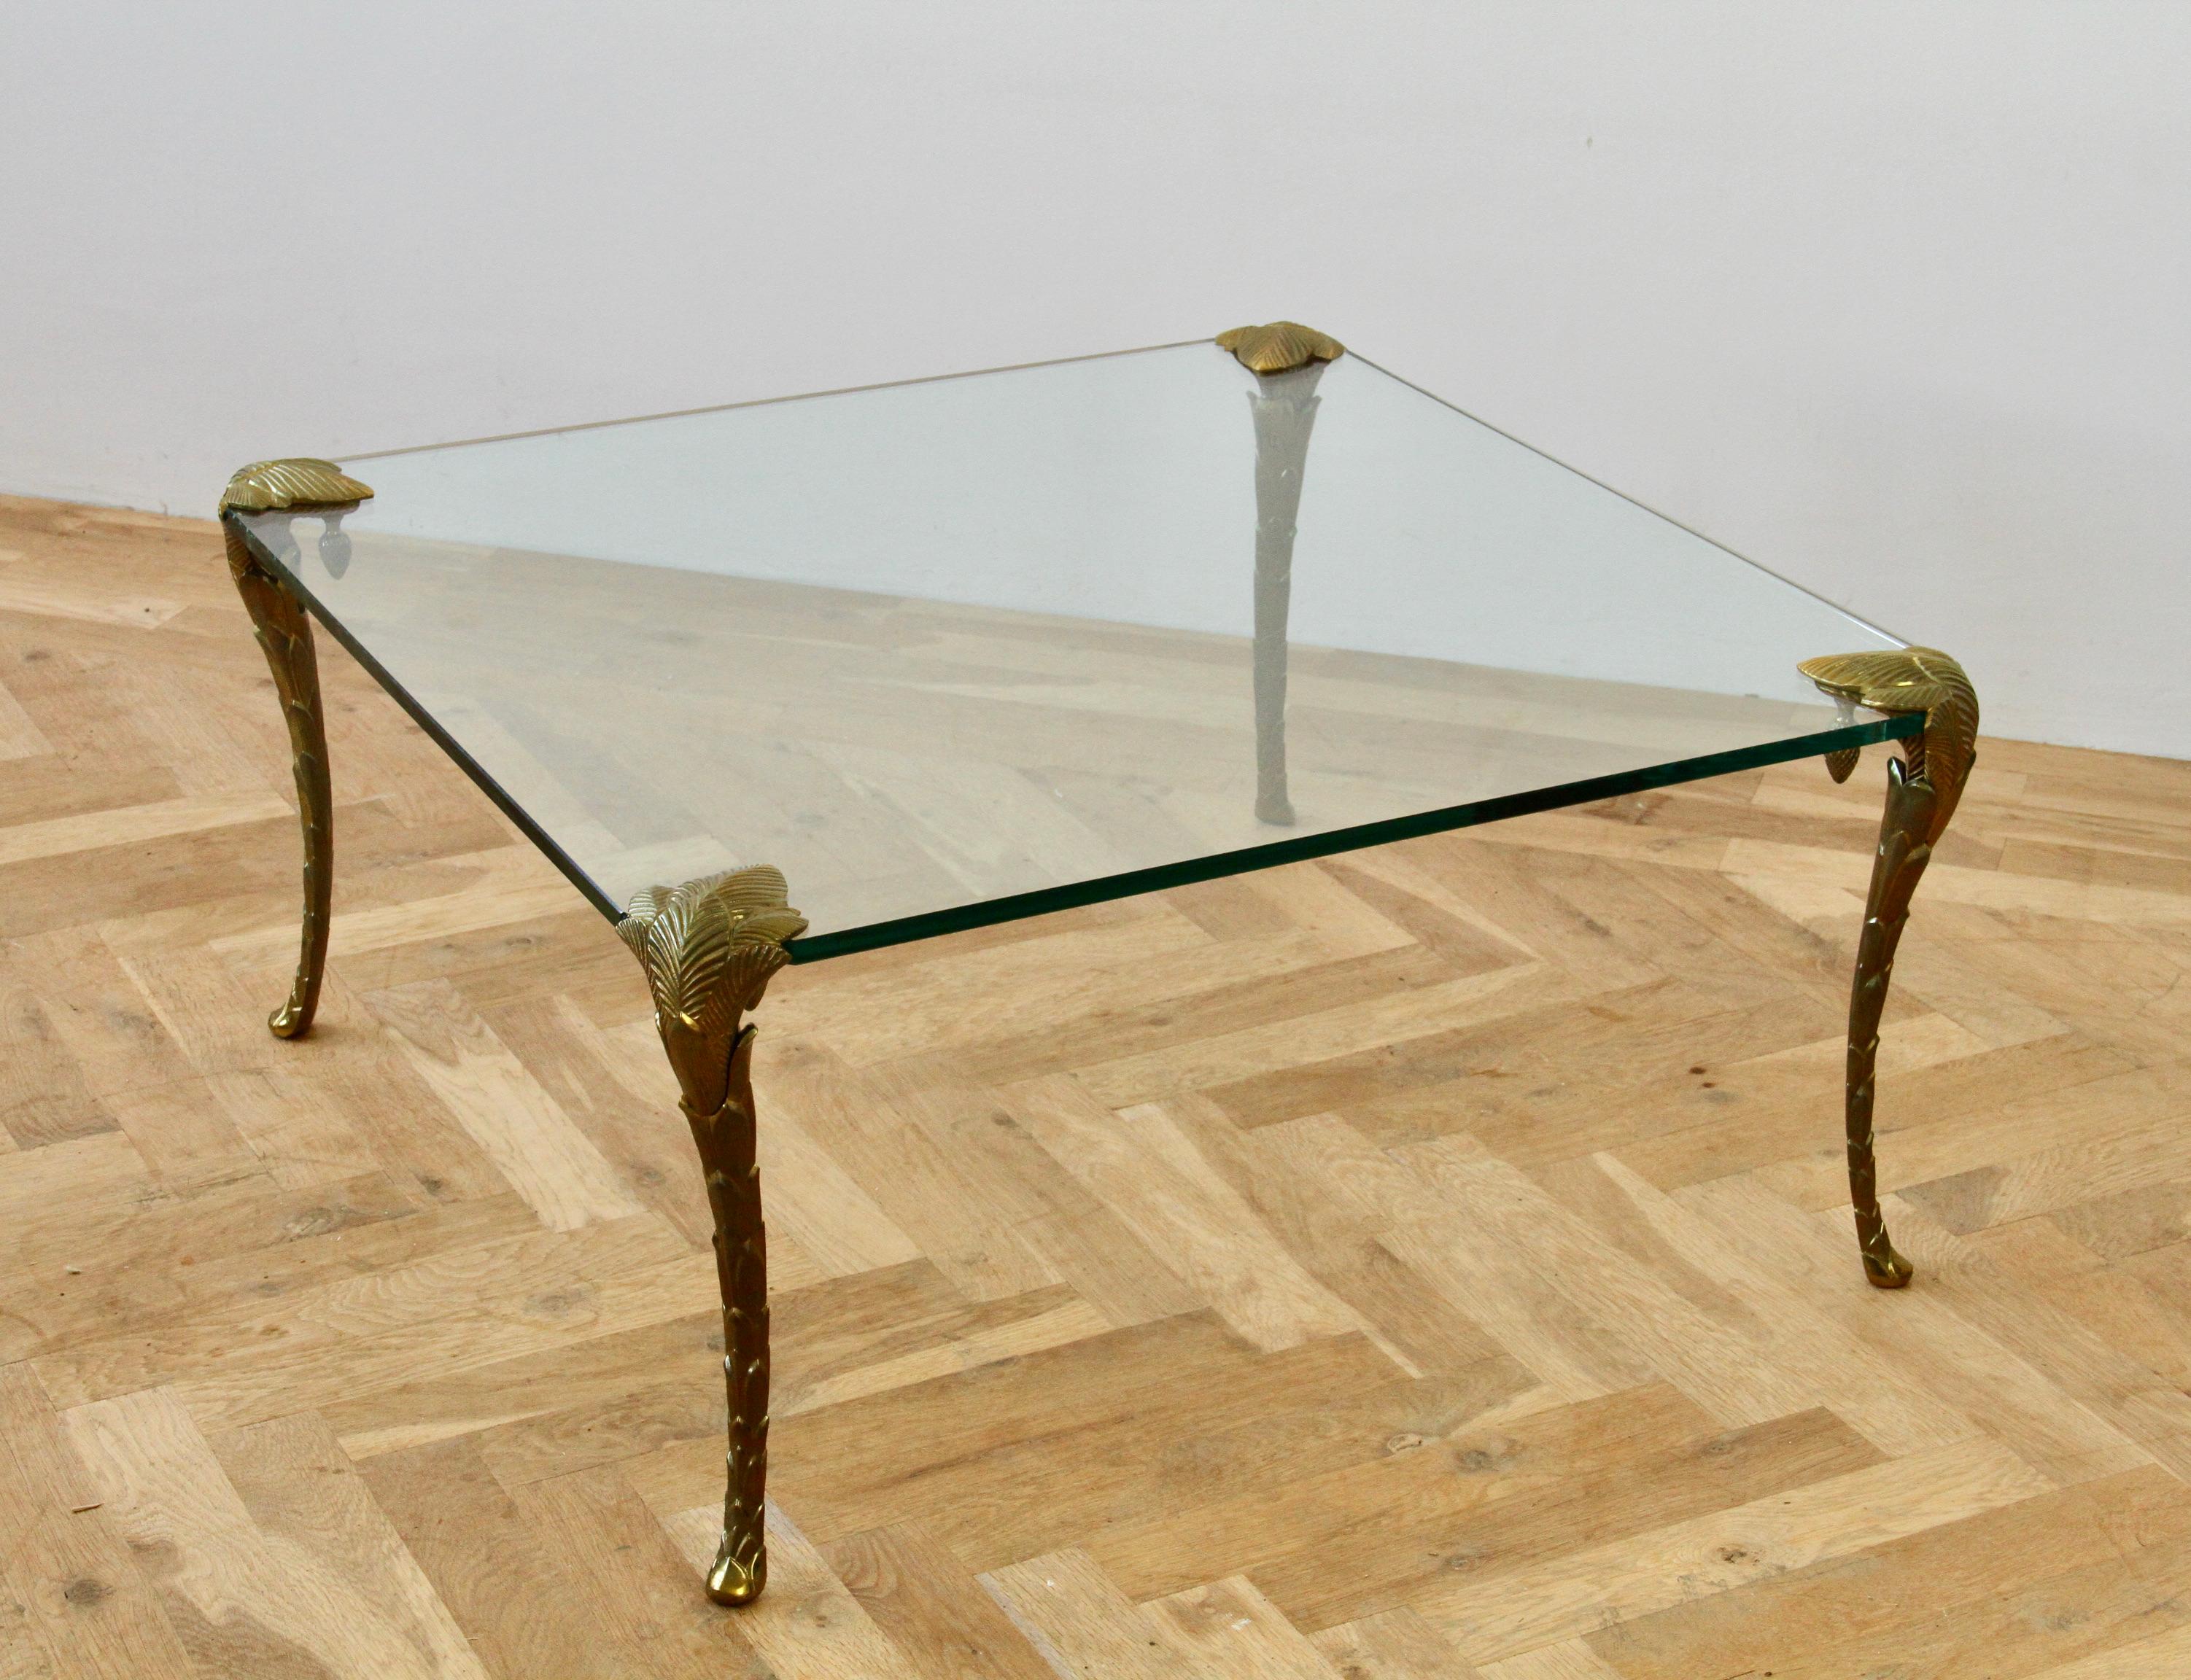 Charles for Maison Charles exceptionally rare 'Palme Pieds' (Palm legs), large gold-plated cast brass/bronze French coffee/center/side table. This is an early example which has the 'pine cone' finals to tighten the legs to the glass table top - the